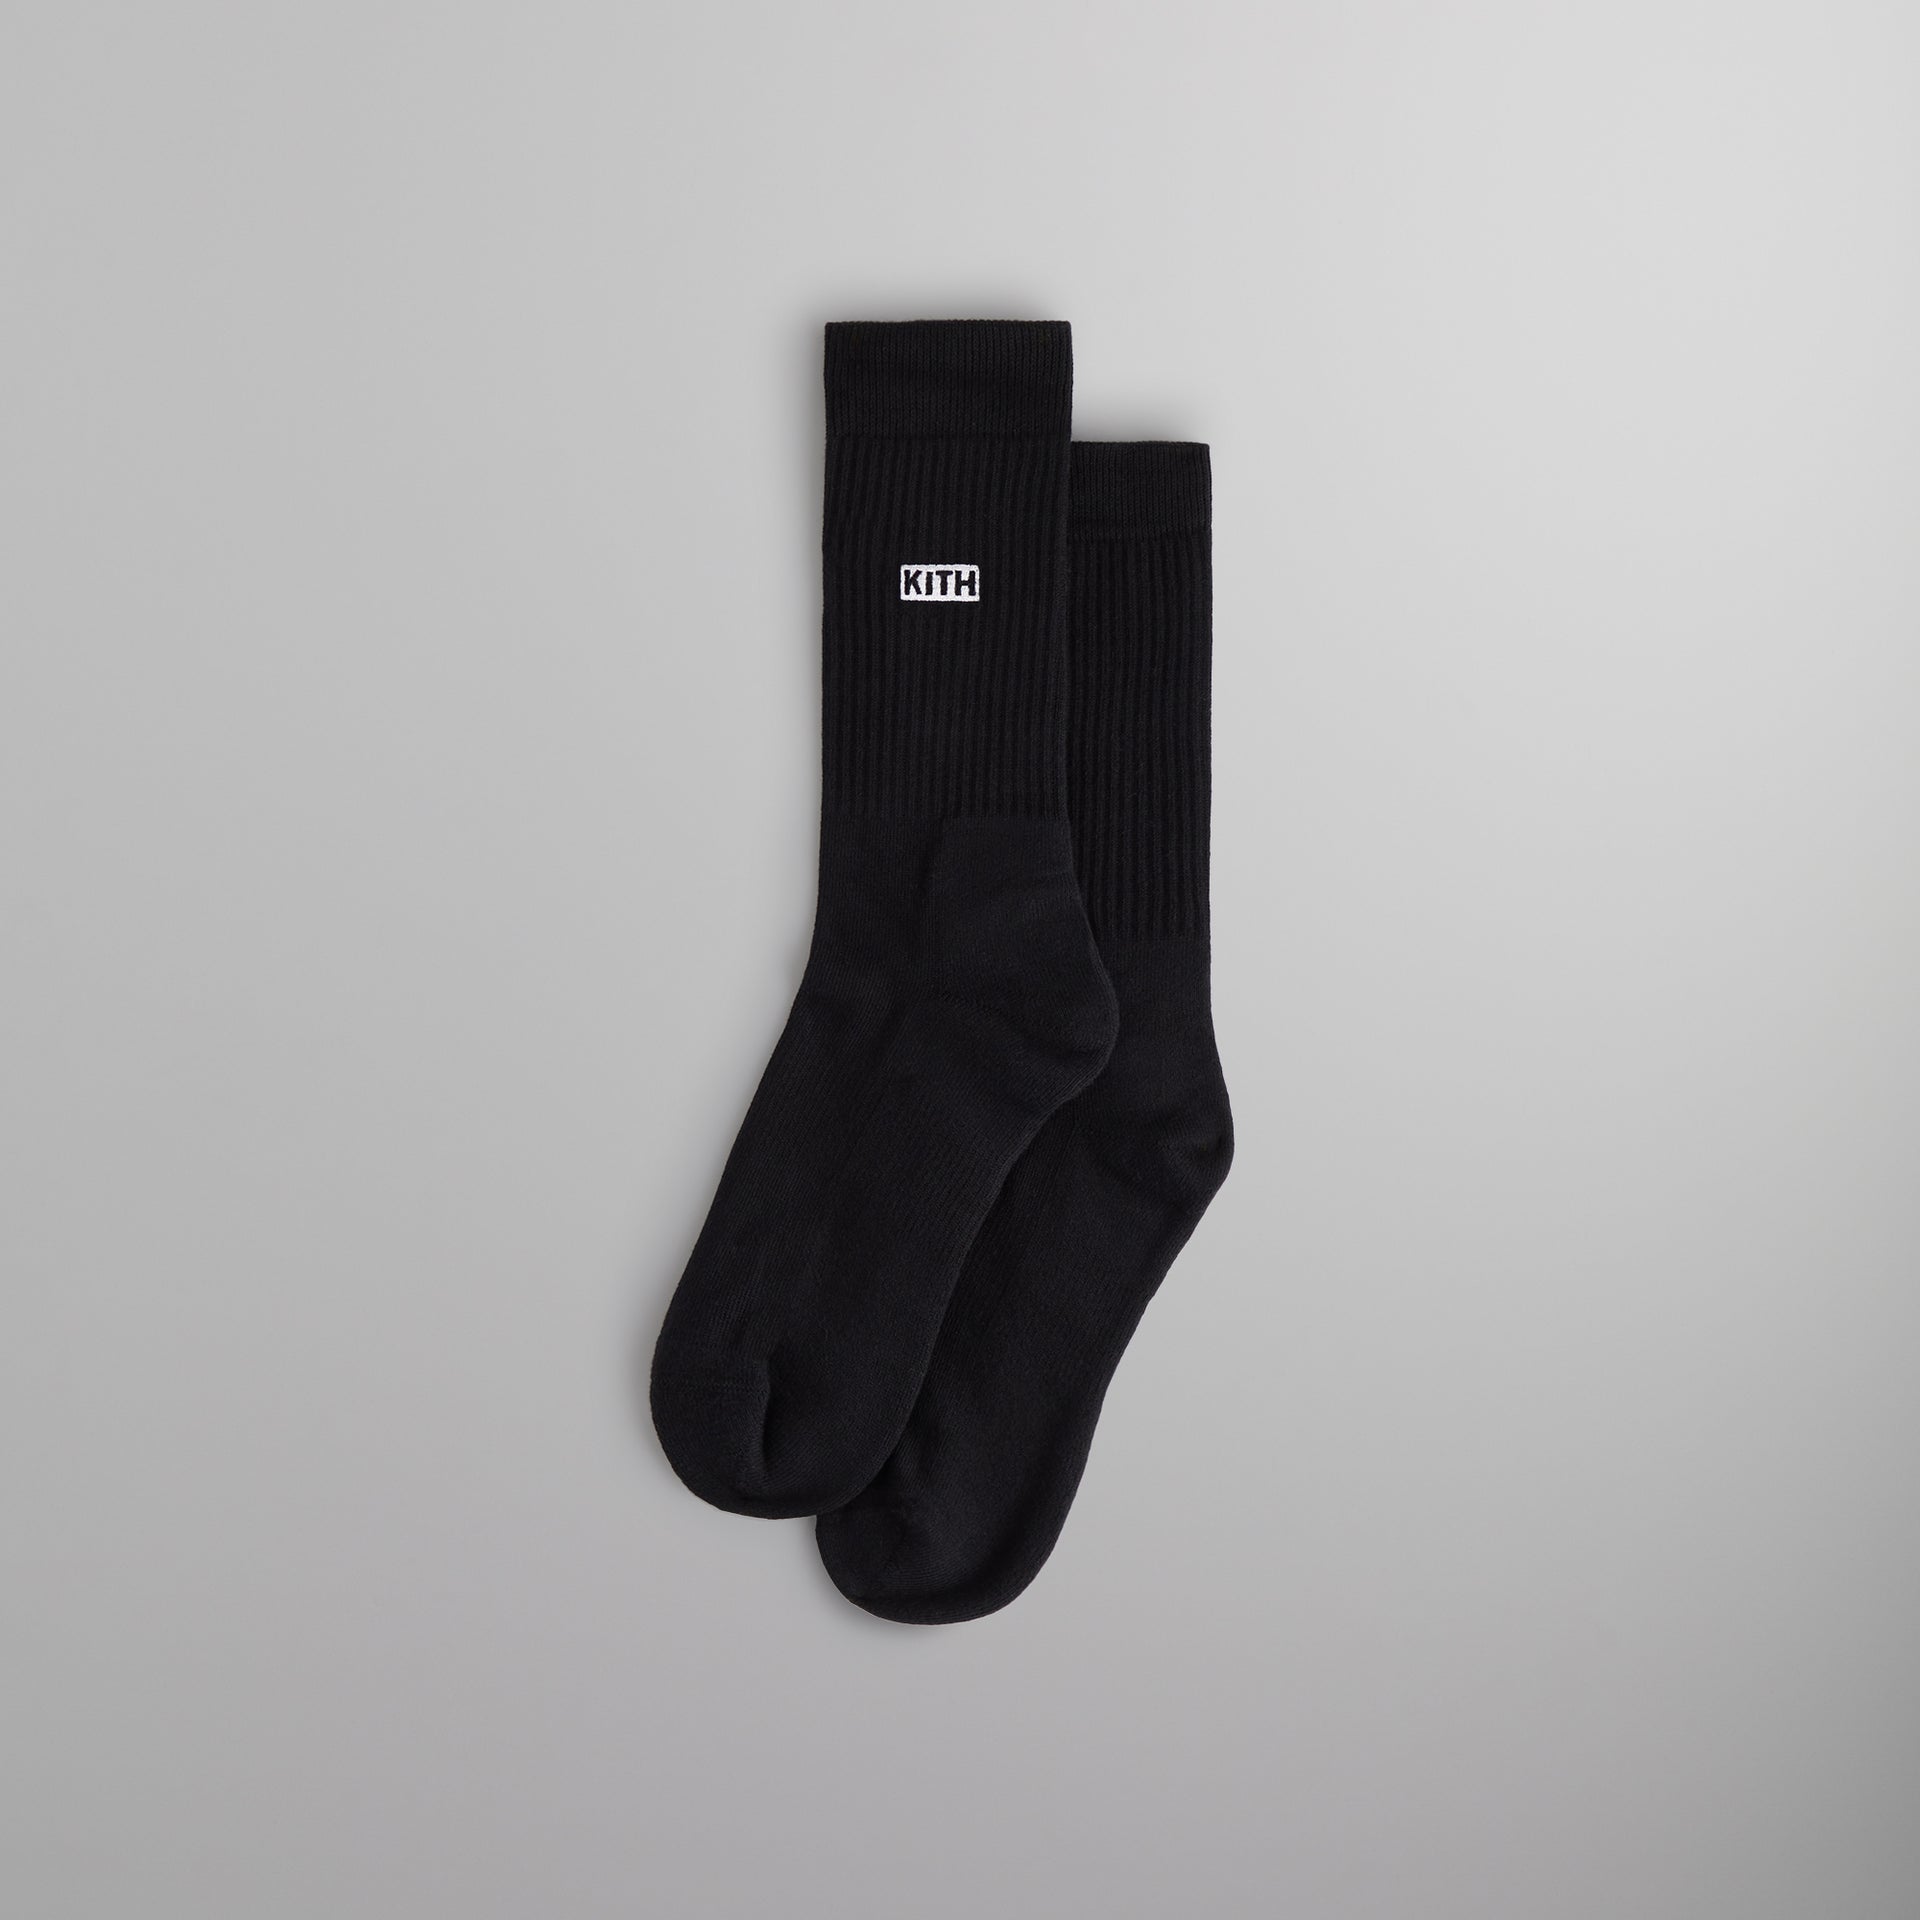 Kith Classics for Stance 2.0 Classic Crew Sock - Black